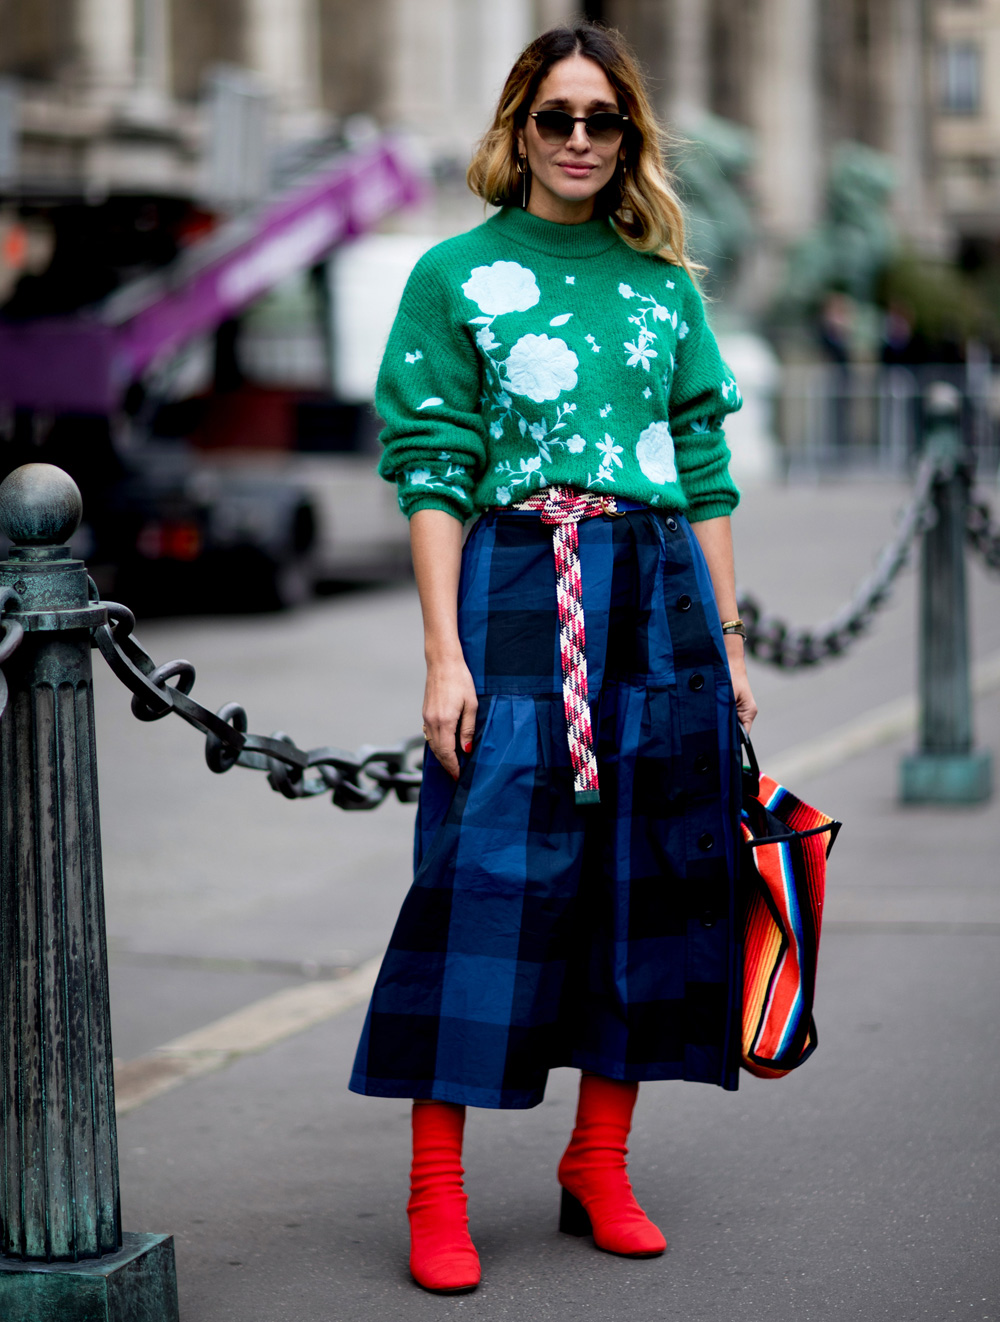 Best Street Style from Paris Fashion Week | About Her